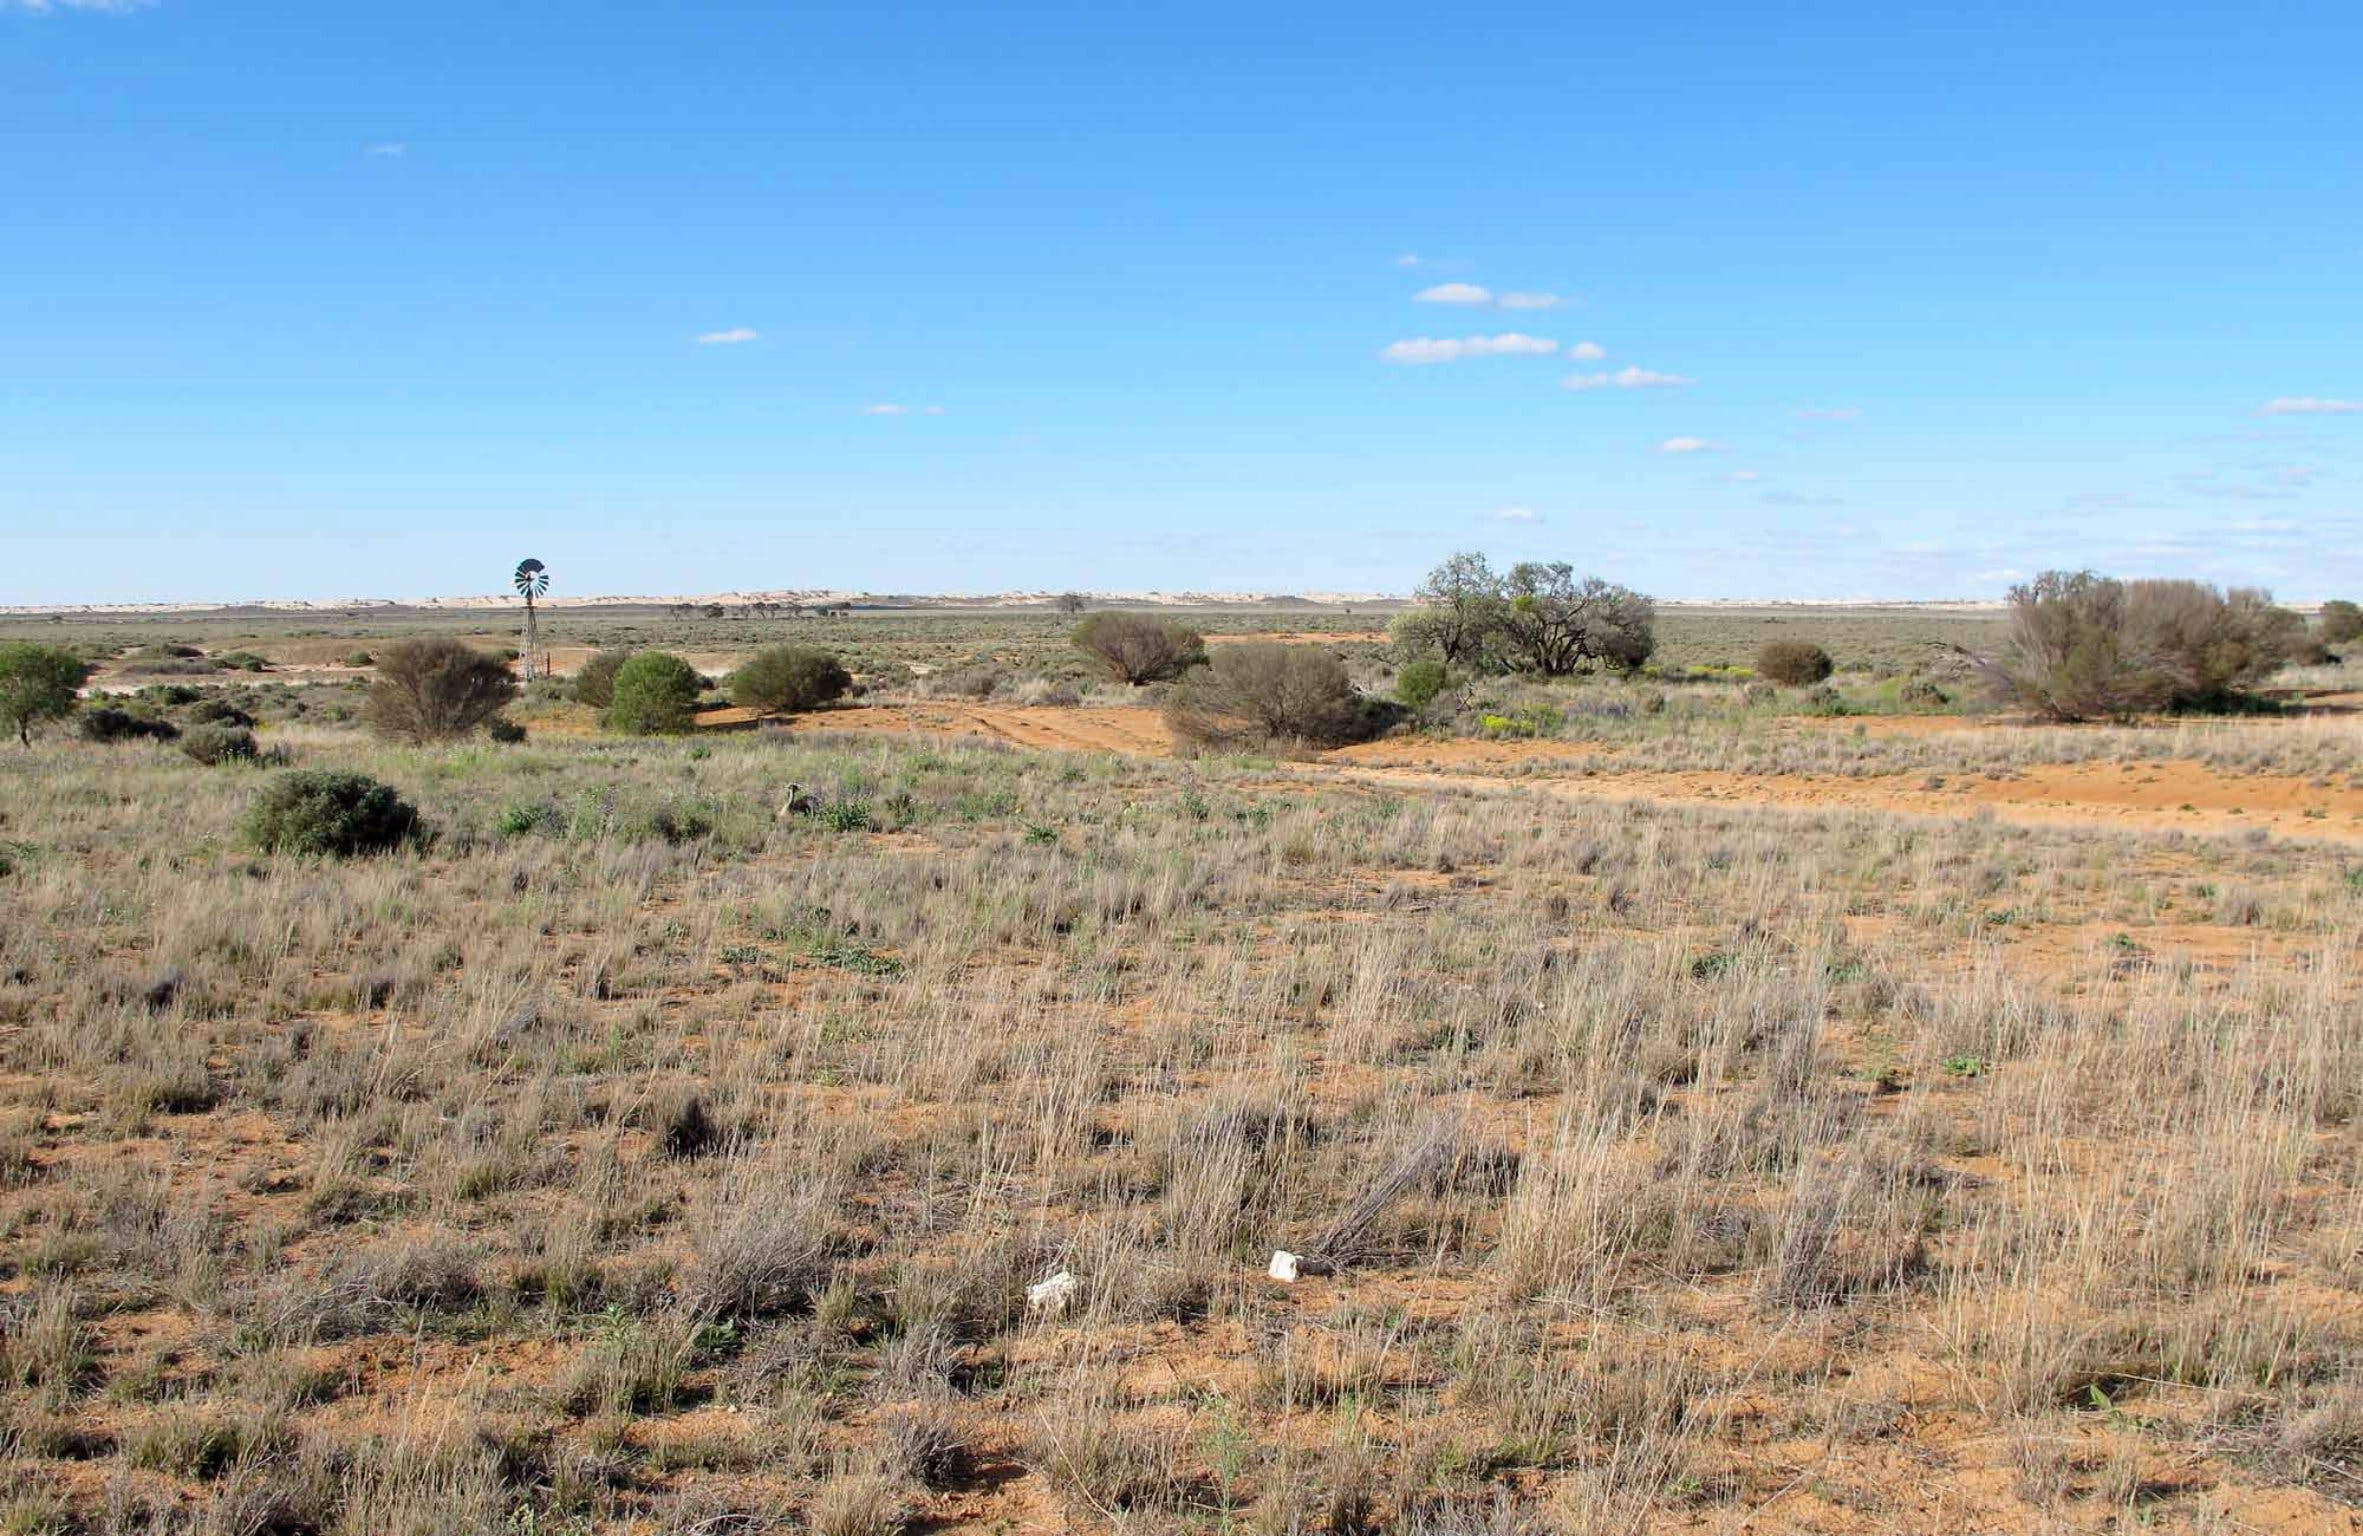 Mungo Self-guided Drive Tour - Find Attractions